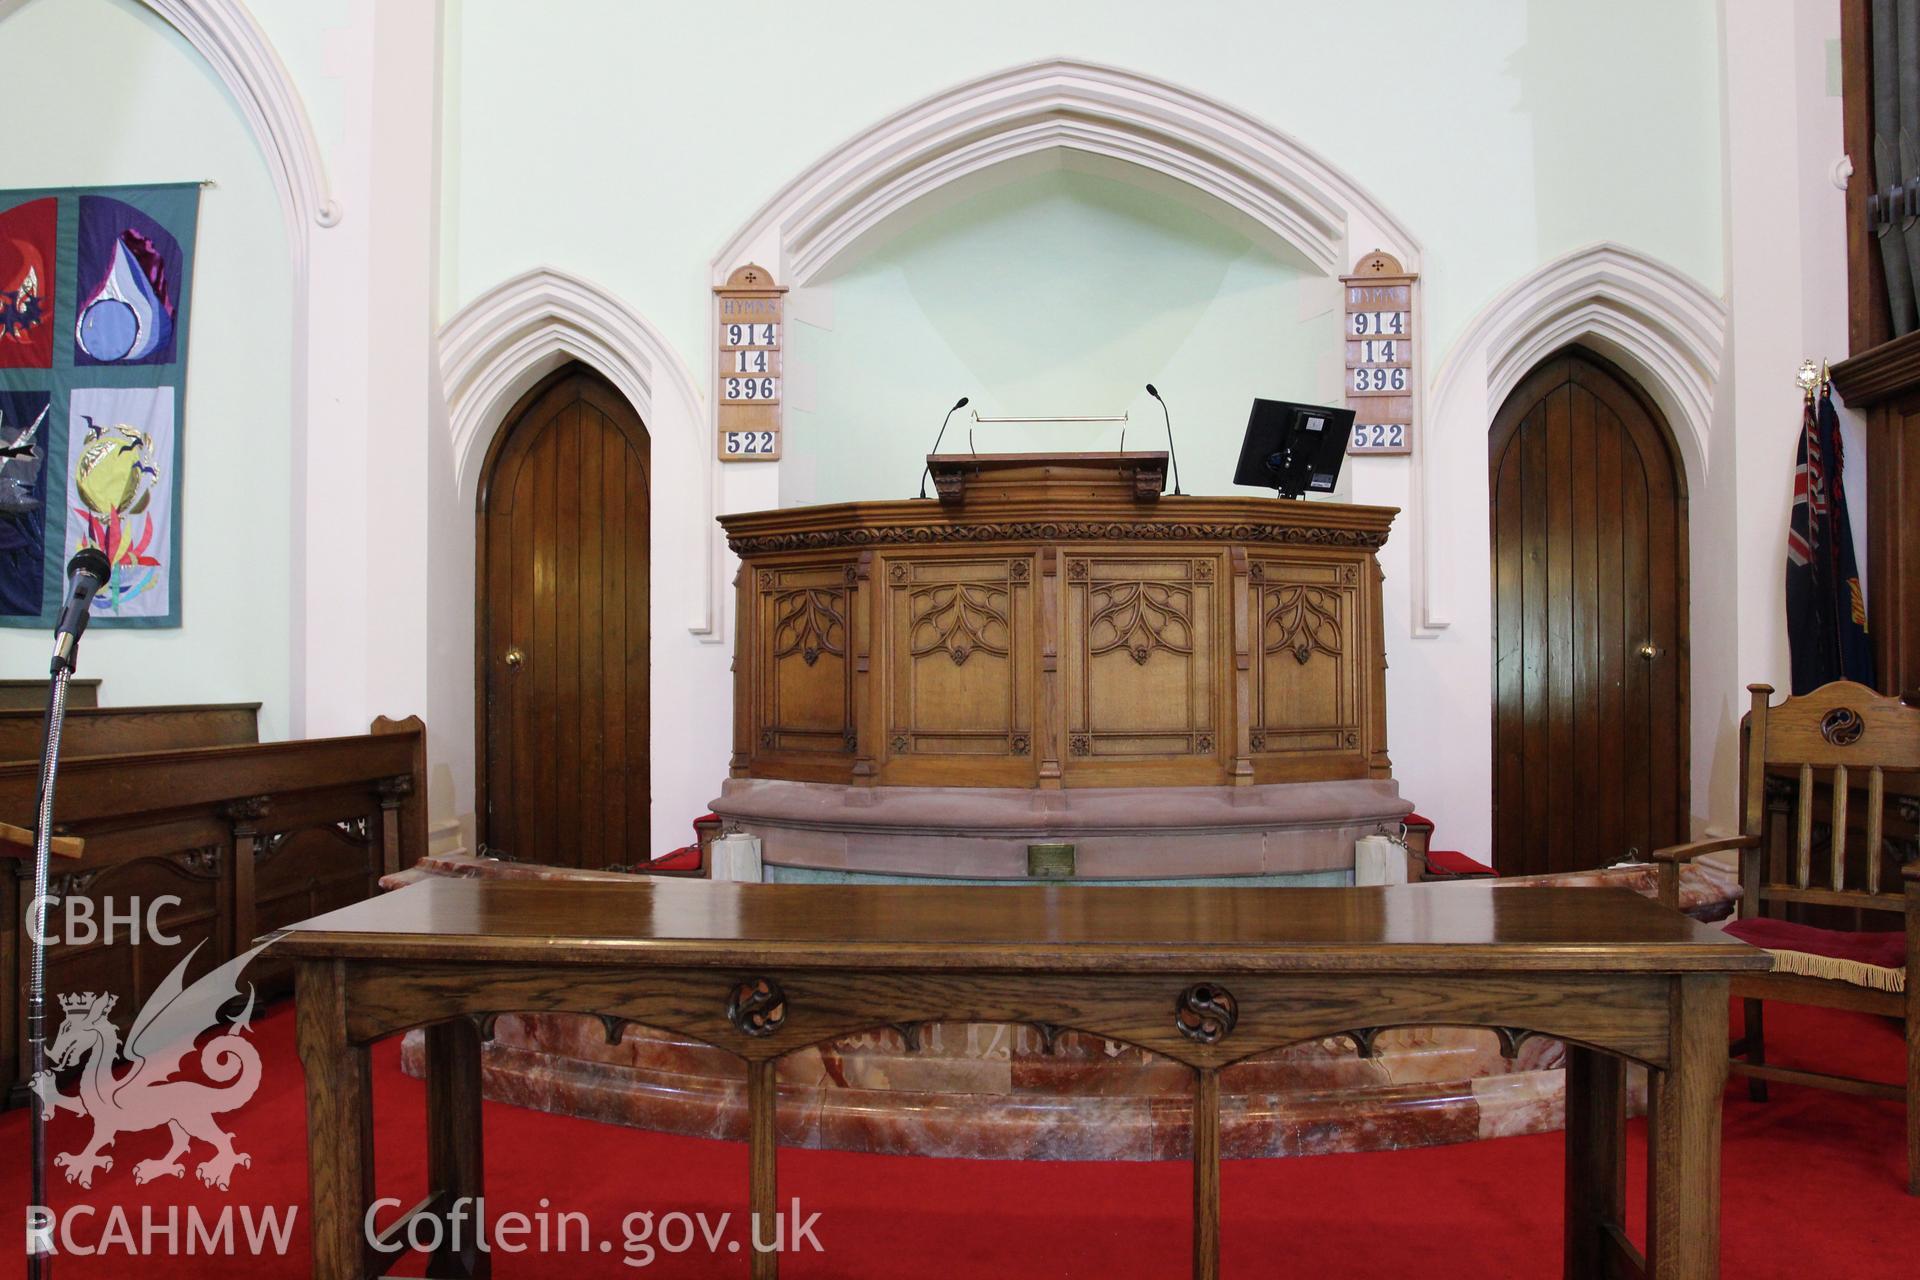 Interior of Hope Baptist Chapel, detail of pulpit and communion table